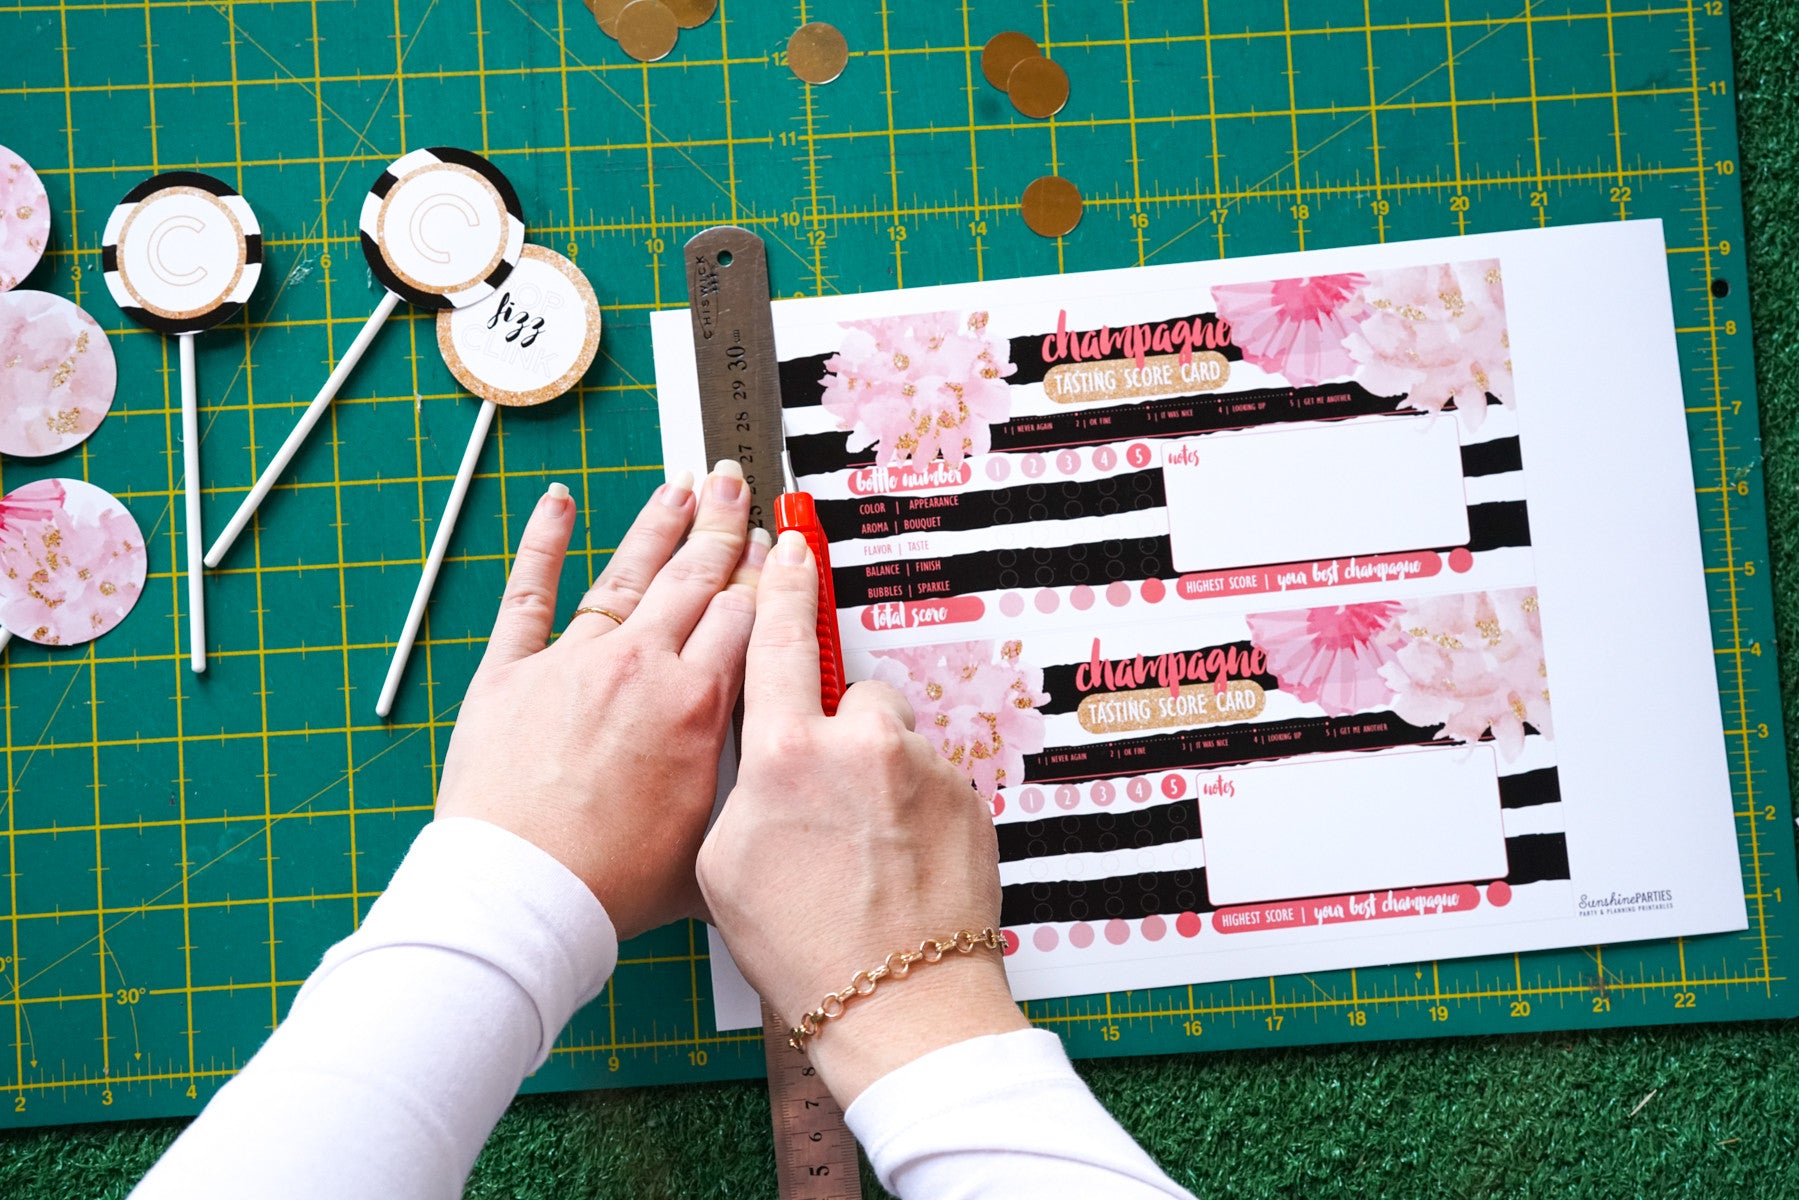 Using a craft knife and cutting mat for party printables